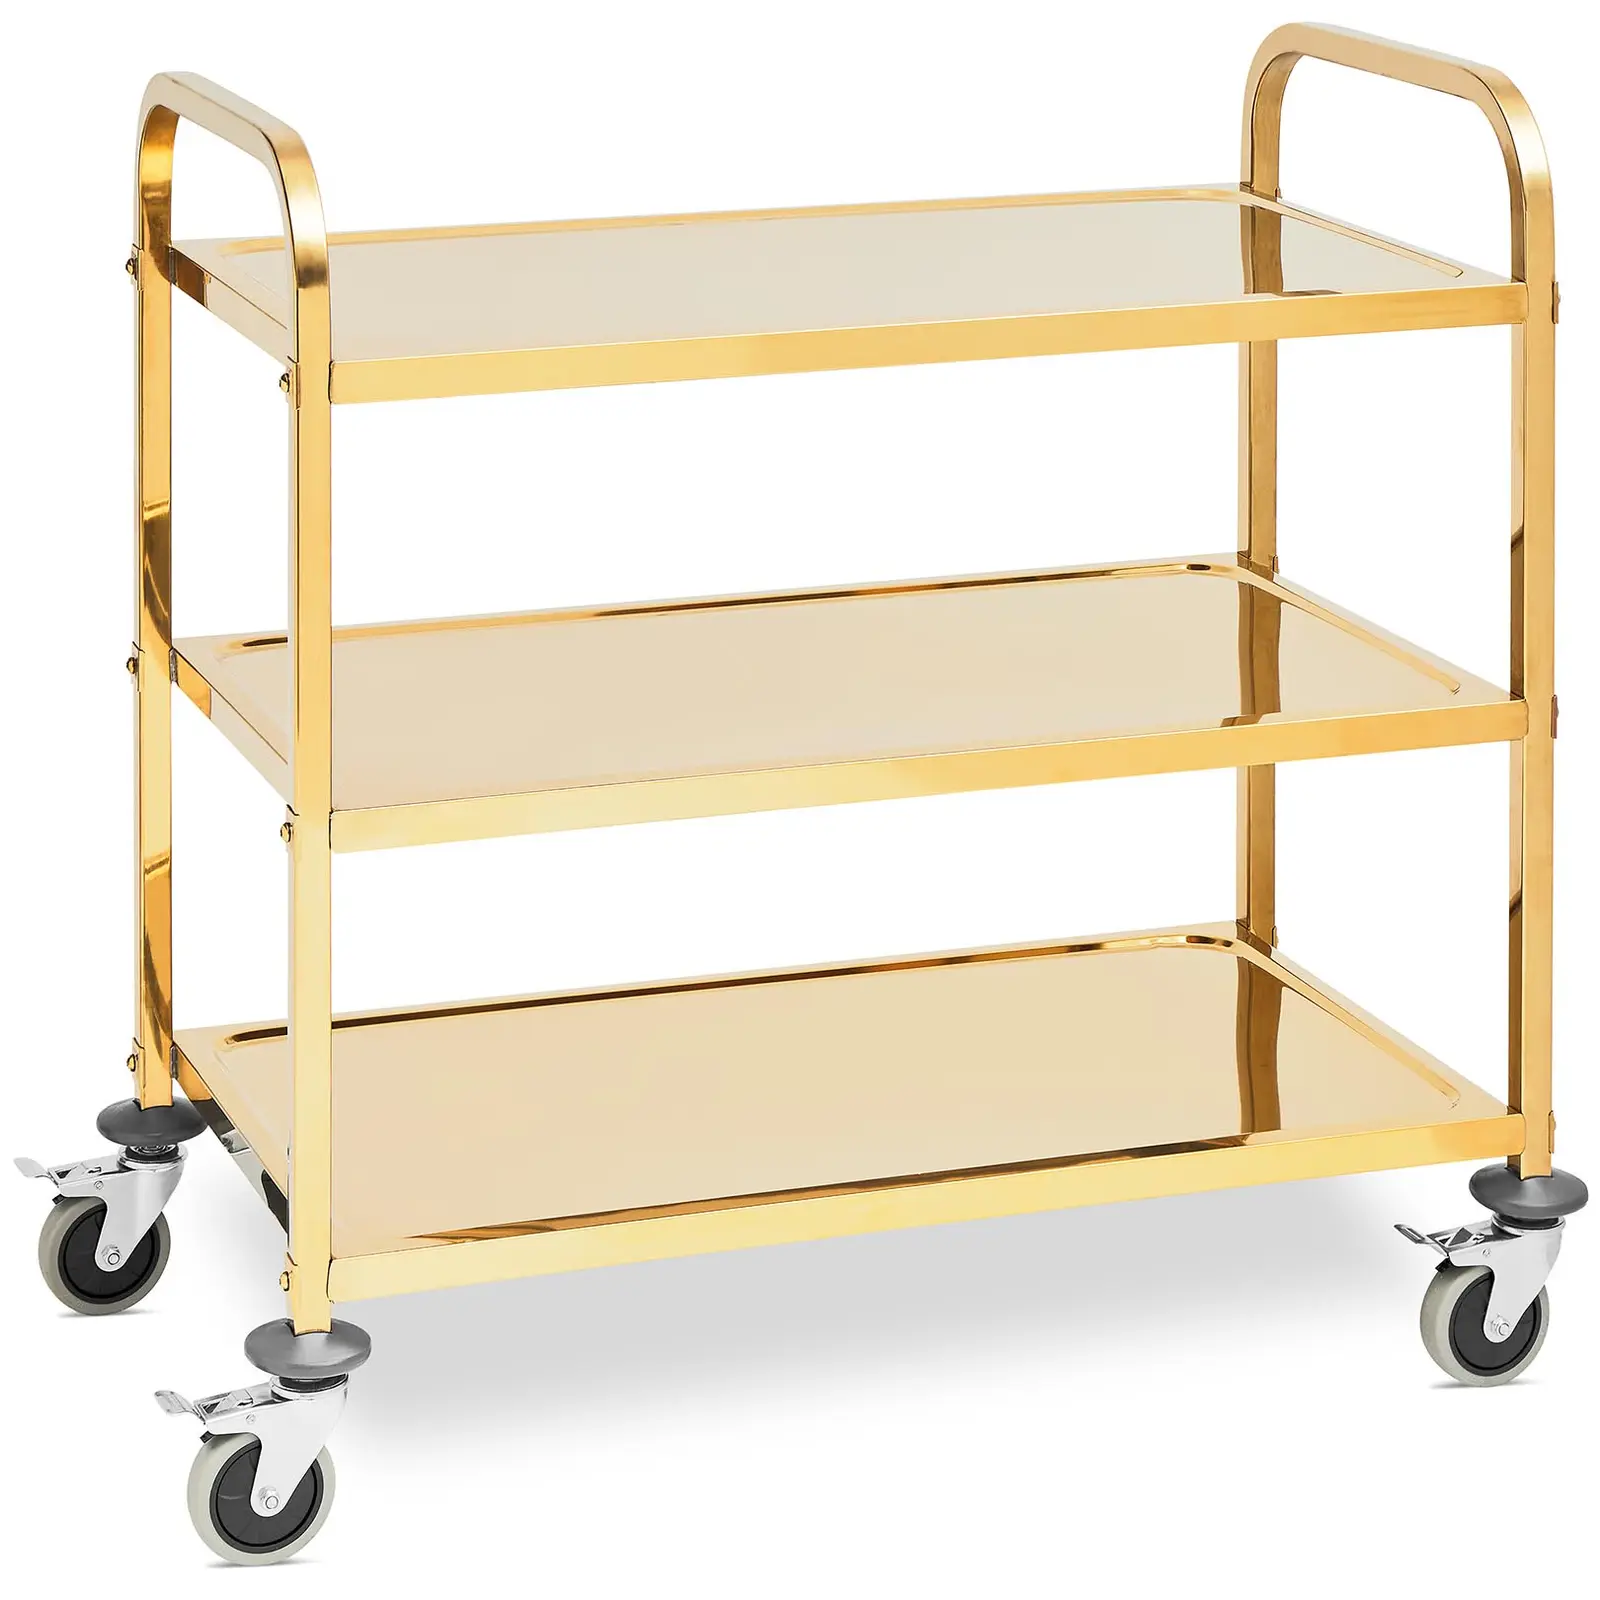 Service Trolley - 3 shelves - Royal Catering - up to 240 kg - shelves: 89.5 x 49.5 cm